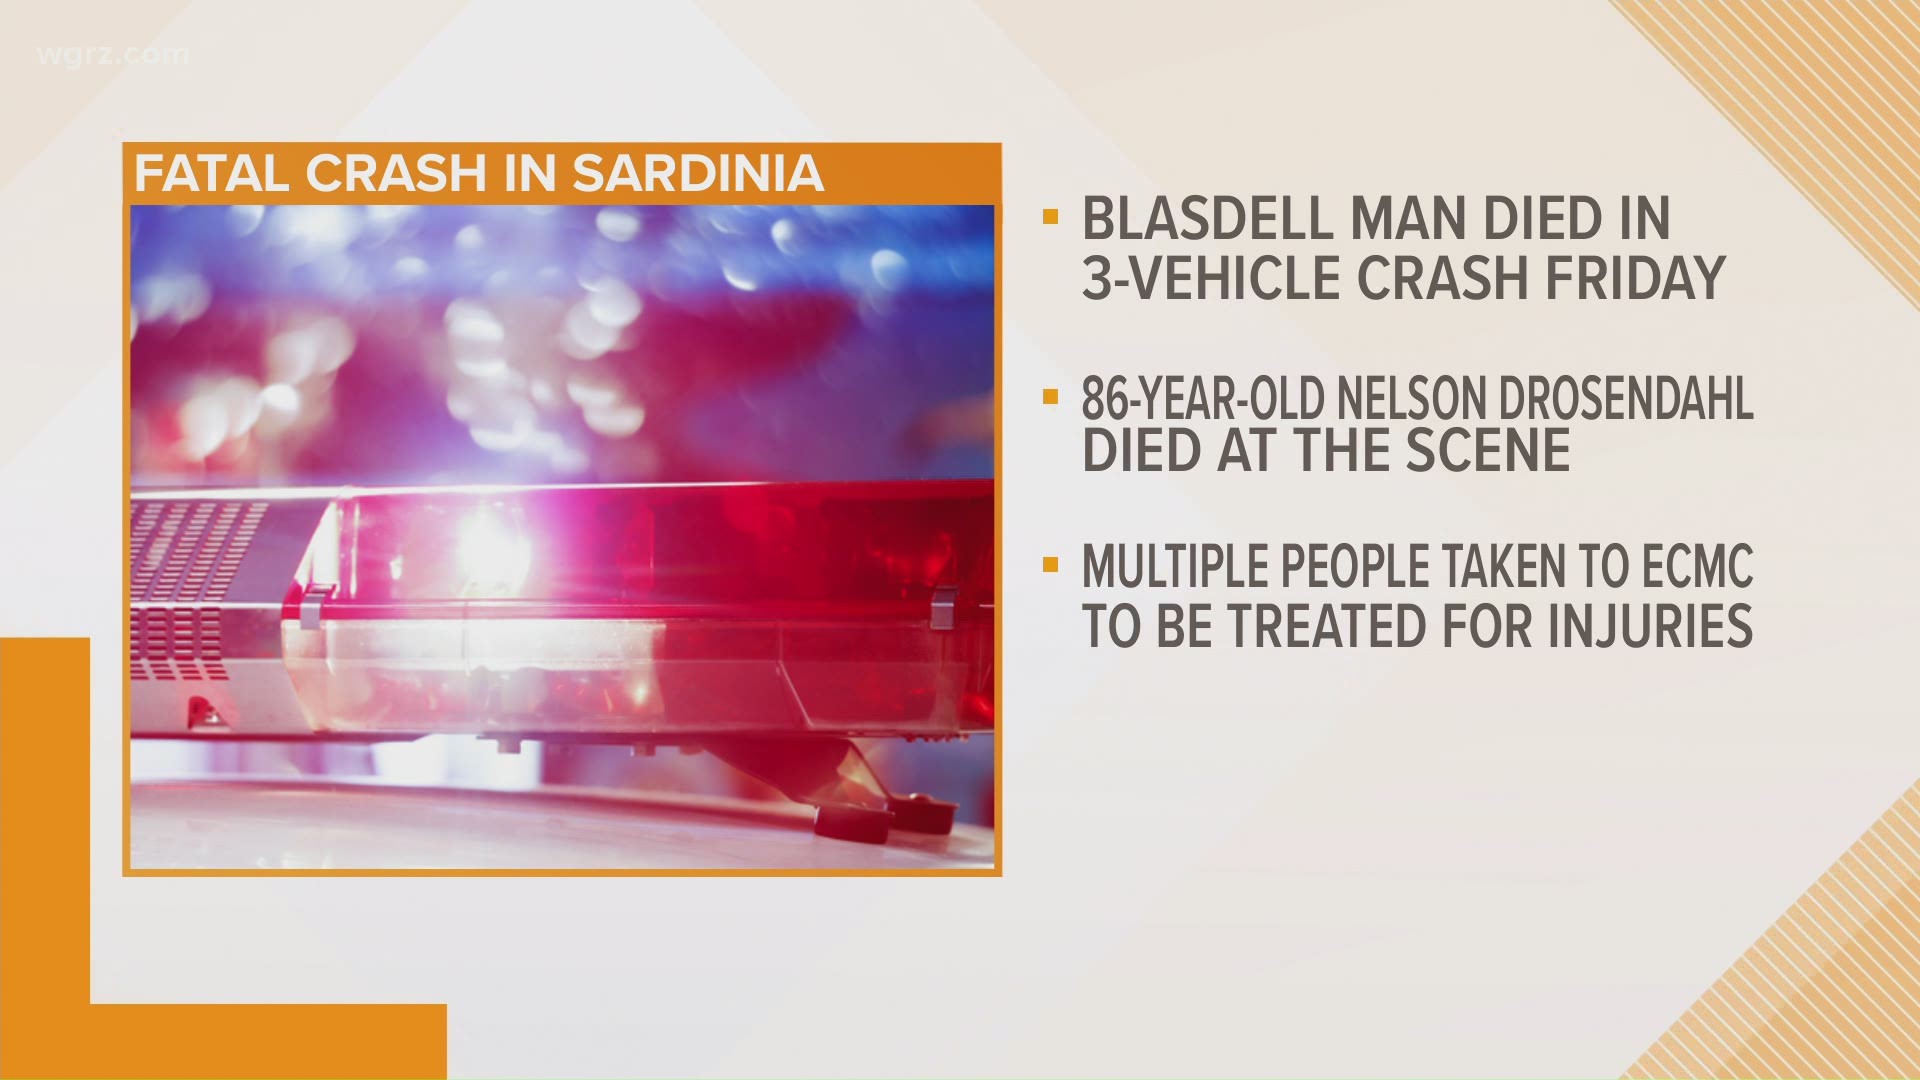 86-year-old Nelson Drosendahl died at the scene of the crash.